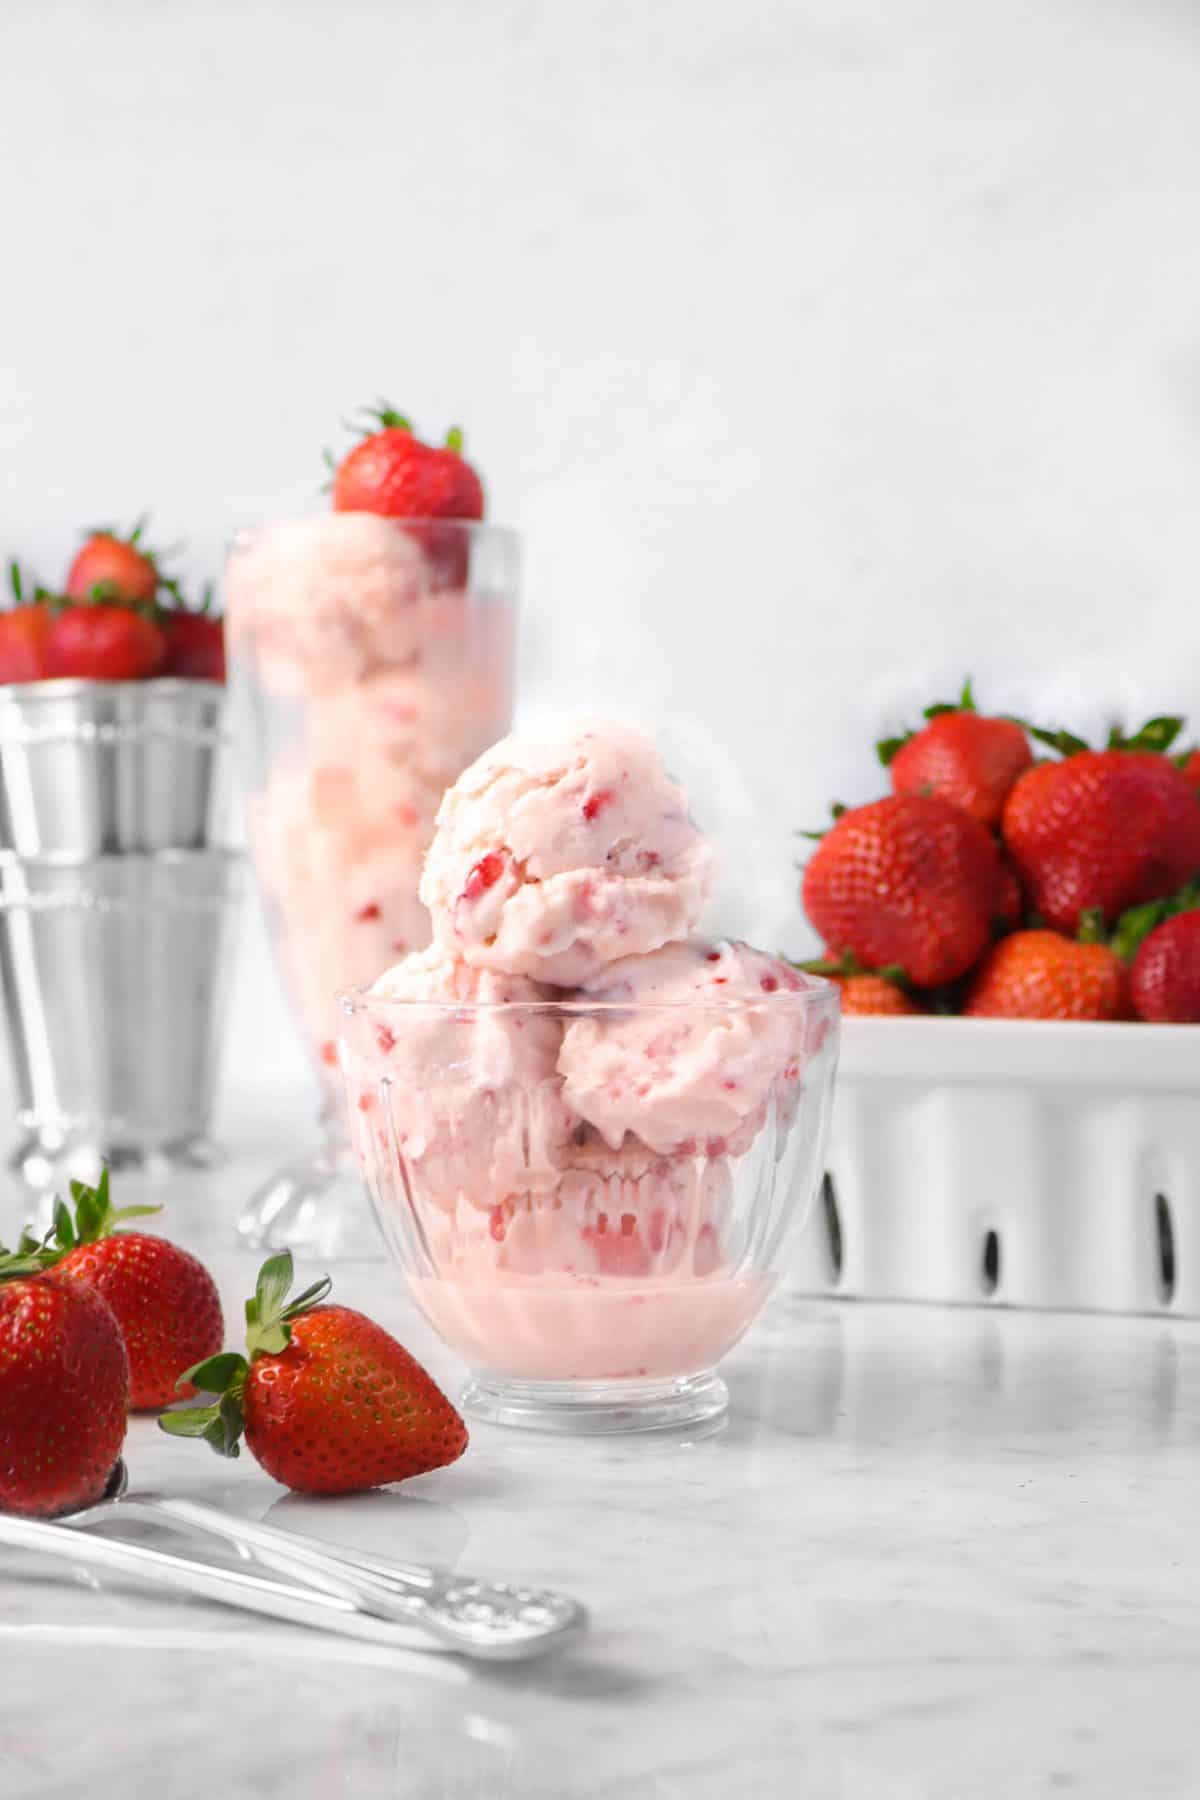 four scoops of strawberry ice cream in a glass bowl with fresh strawberries, two mint julep cups, and a milkshake glass